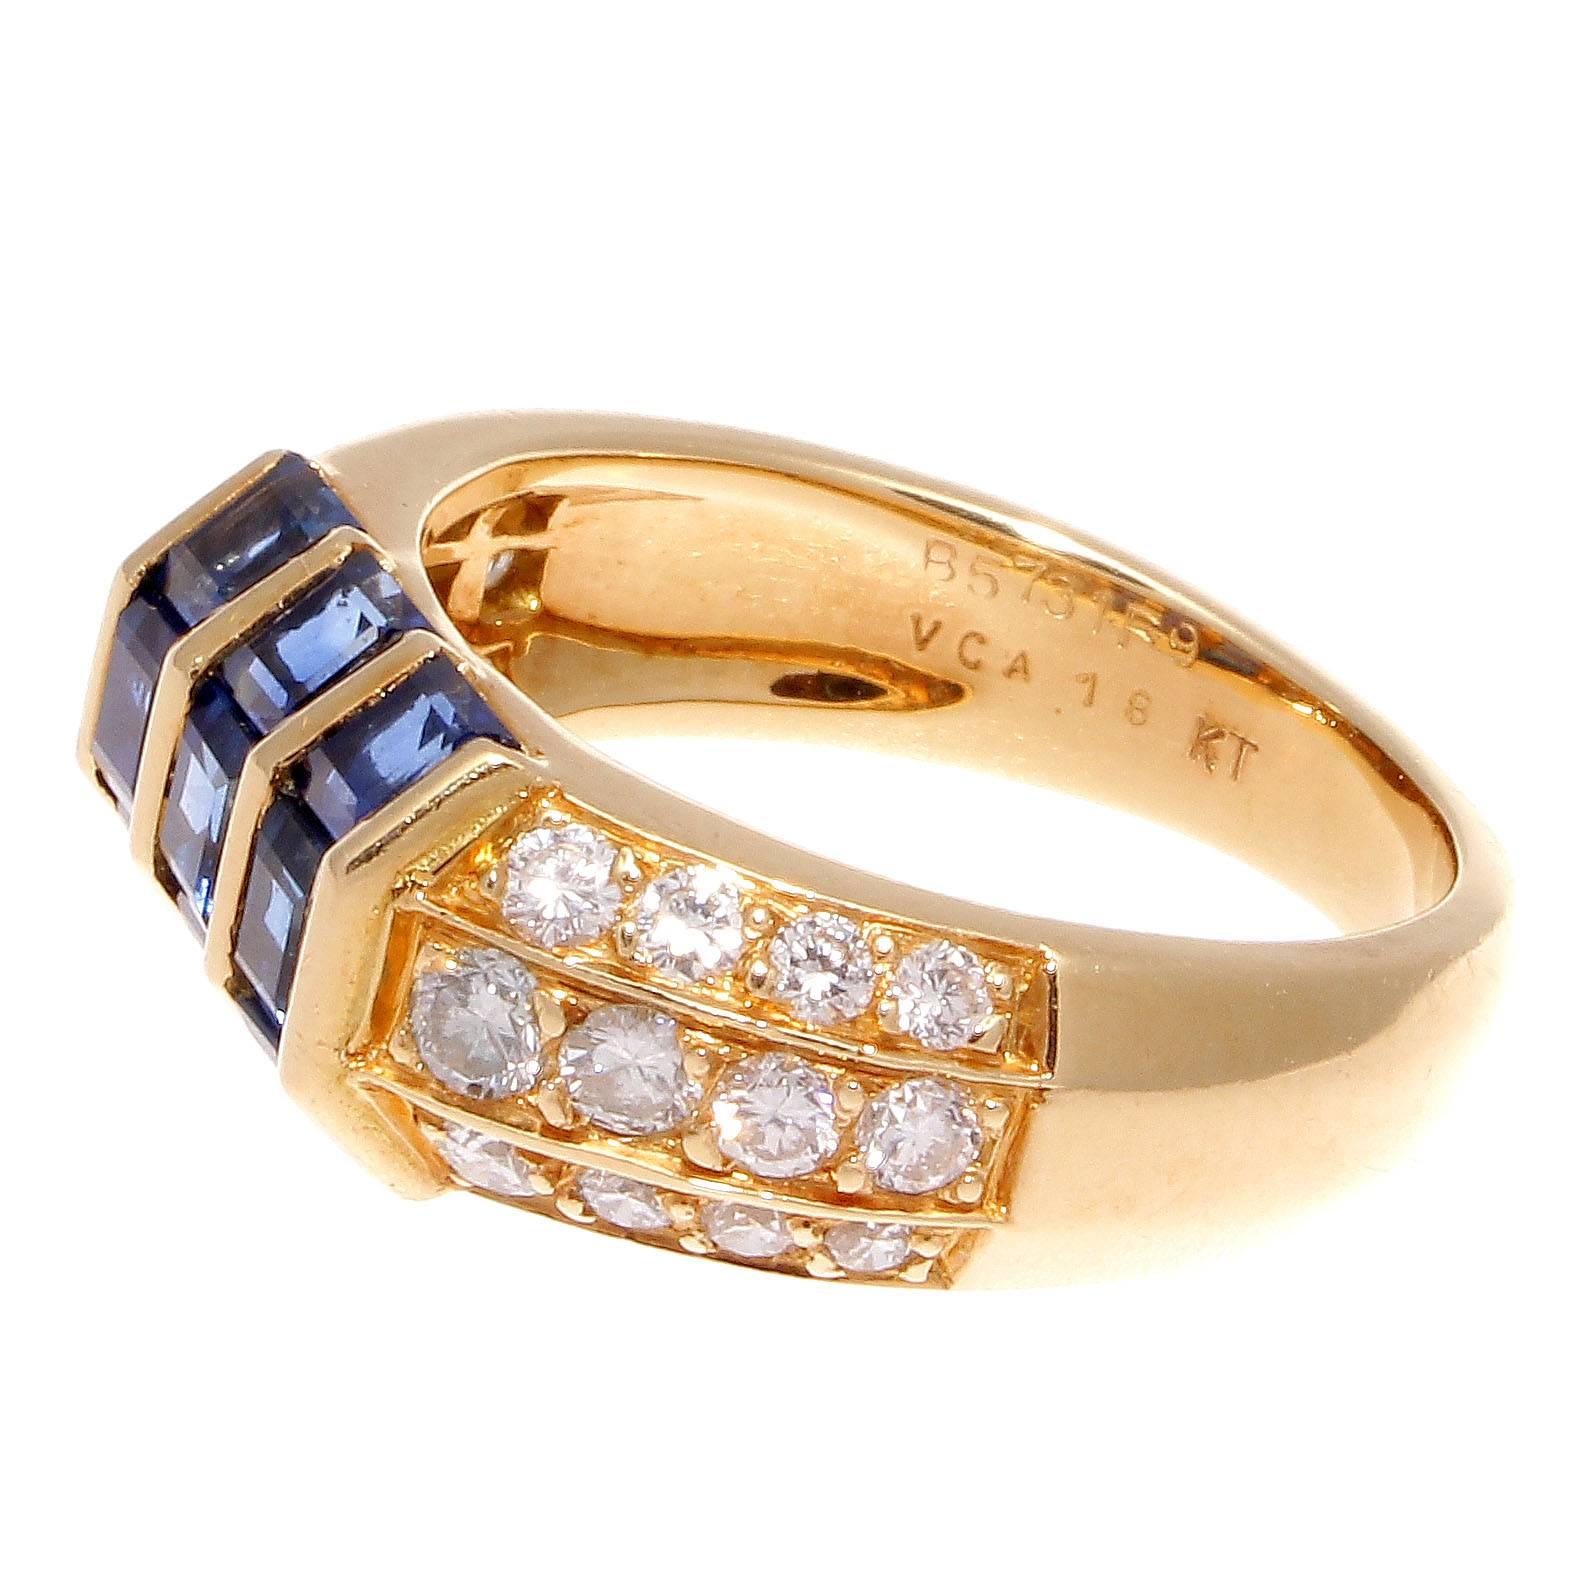 Van Cleef and Arpels mastery is on display with this eye catching design. Featuring 2.36 carats of square cut royal blue sapphires perfectly complimented by shoulders of vertically set colorless diamonds. Crafted in 18k yellow gold. Signed VCA,